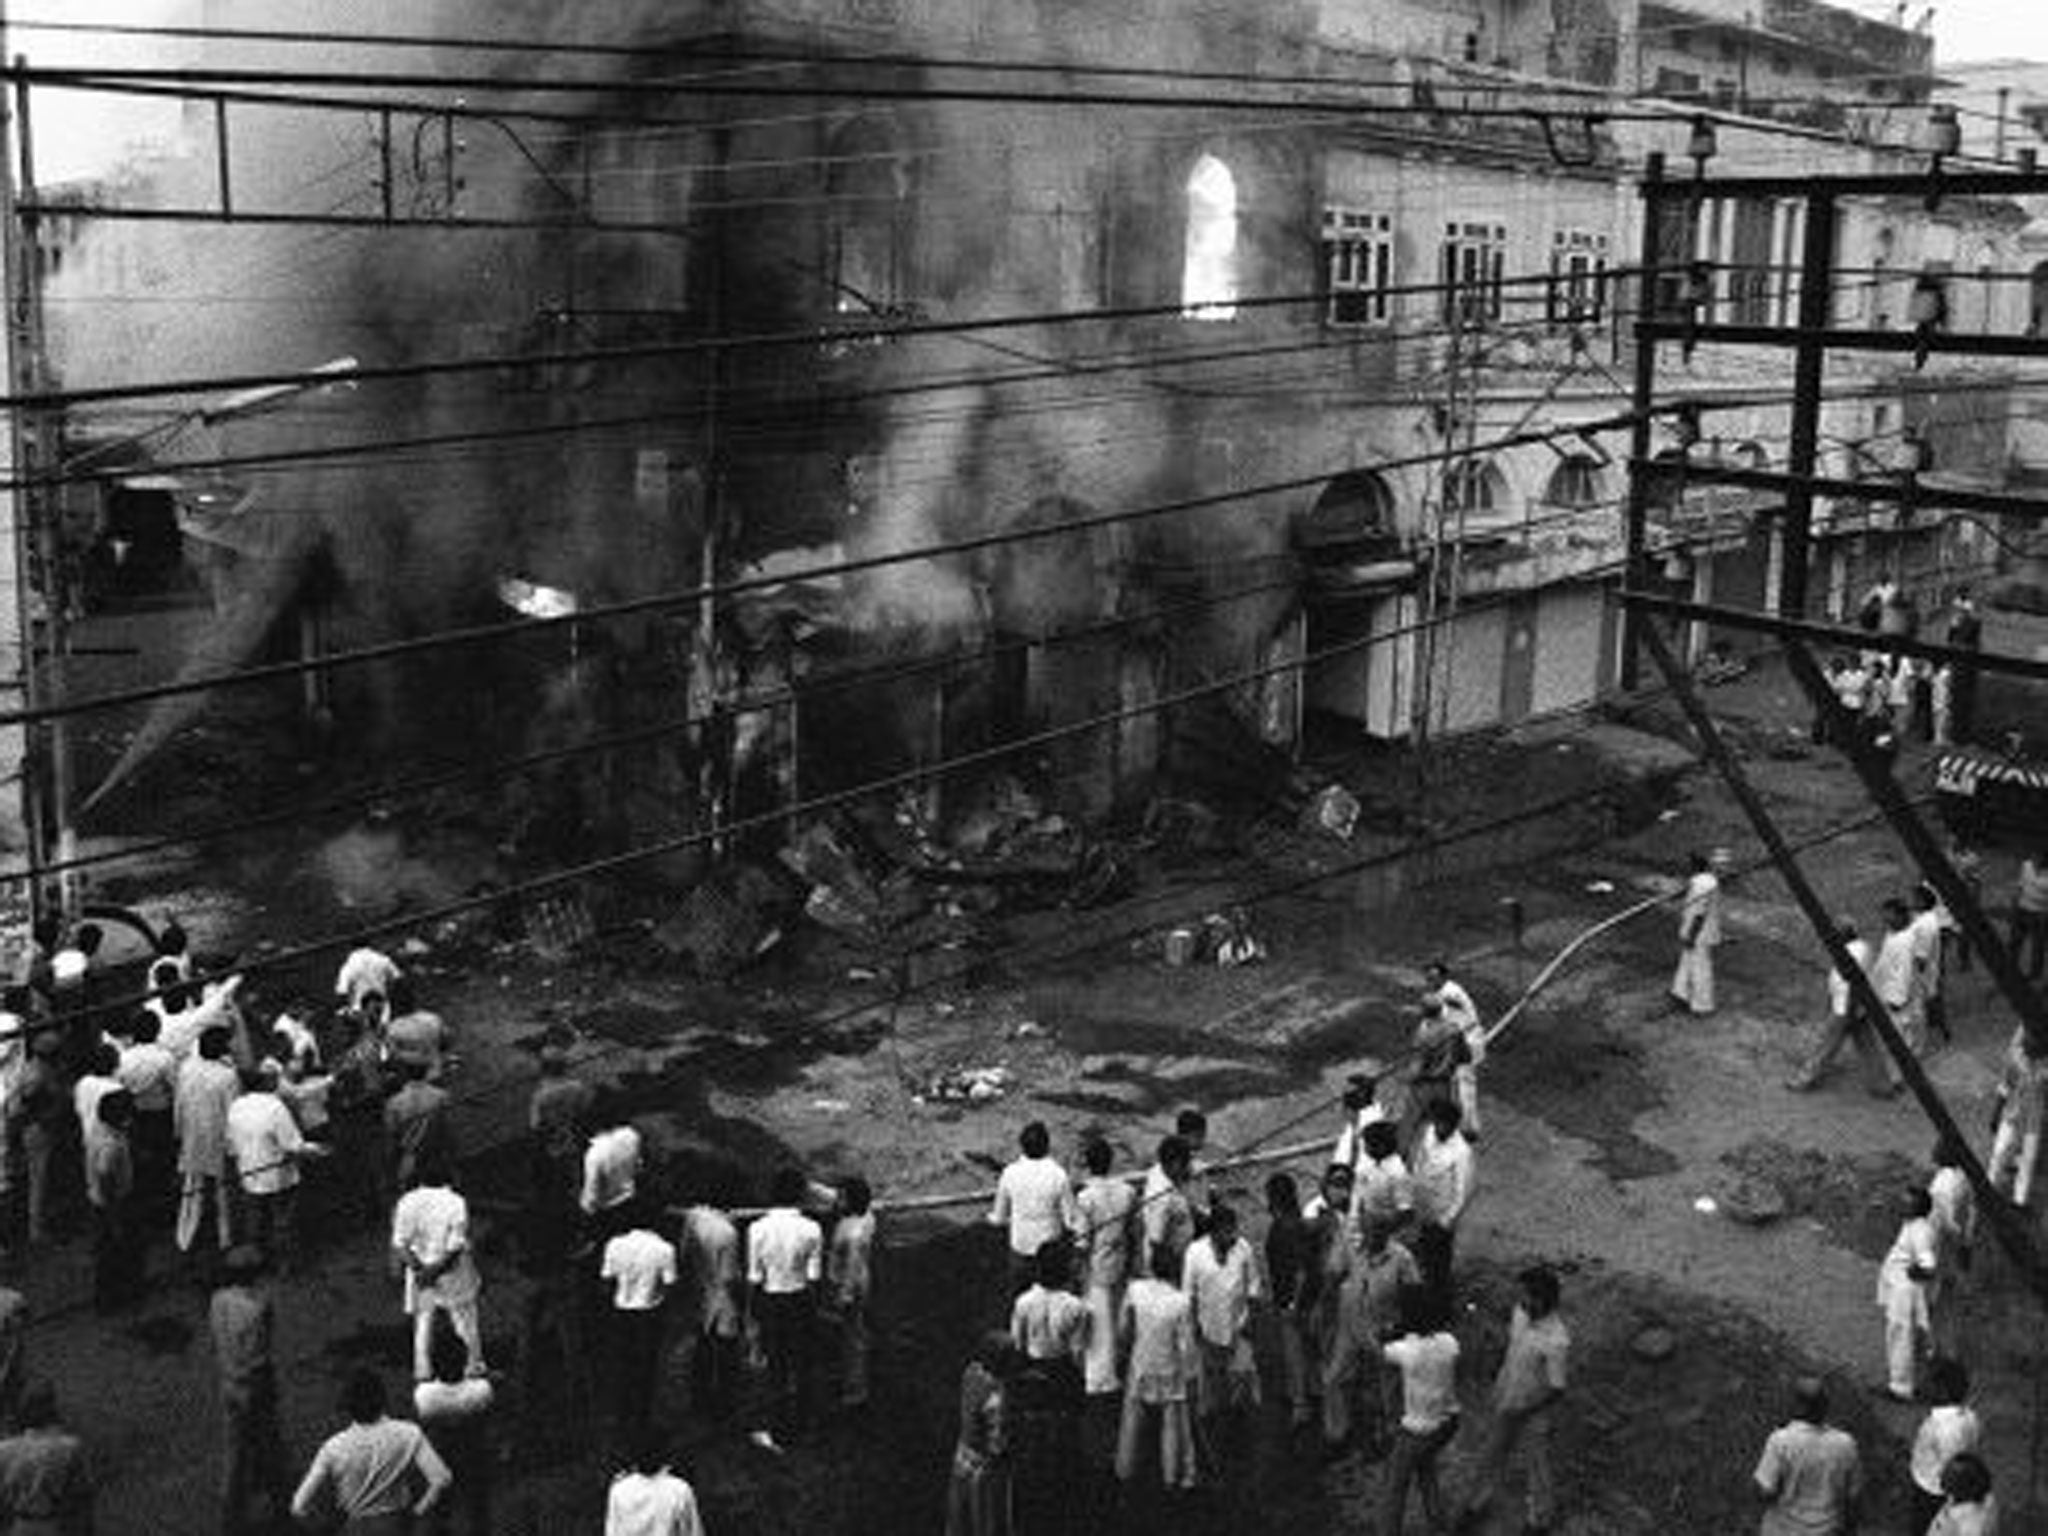 After the 1984 killing of Indira Gandhi, India’s ‘mighty oak’, the country’s Sikhs paid a terrible price in blood